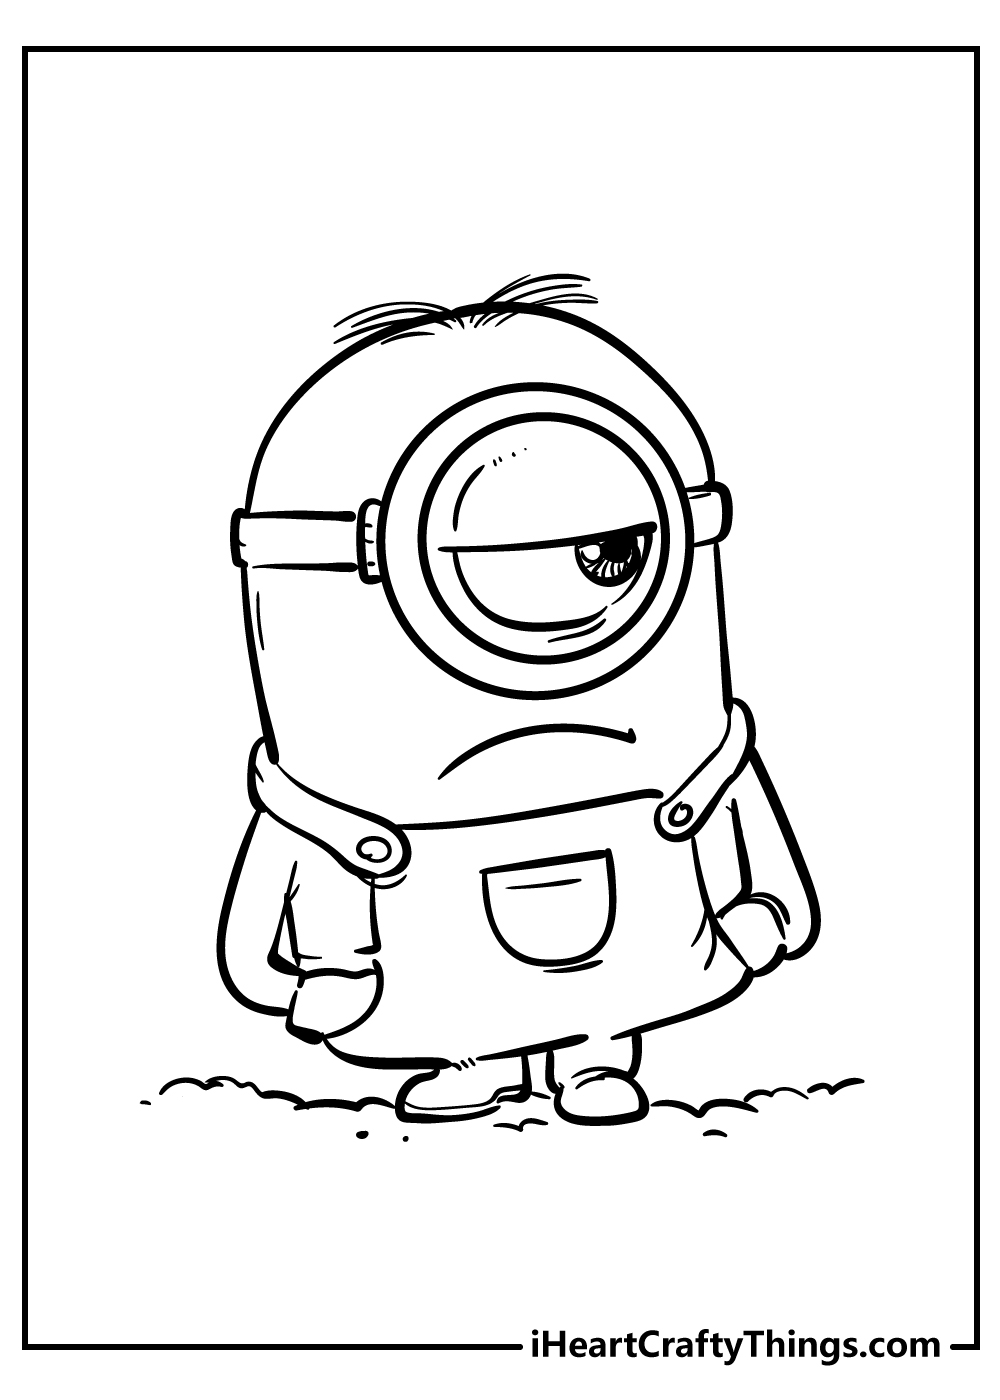 Minions Coloring Pages for adults free printable